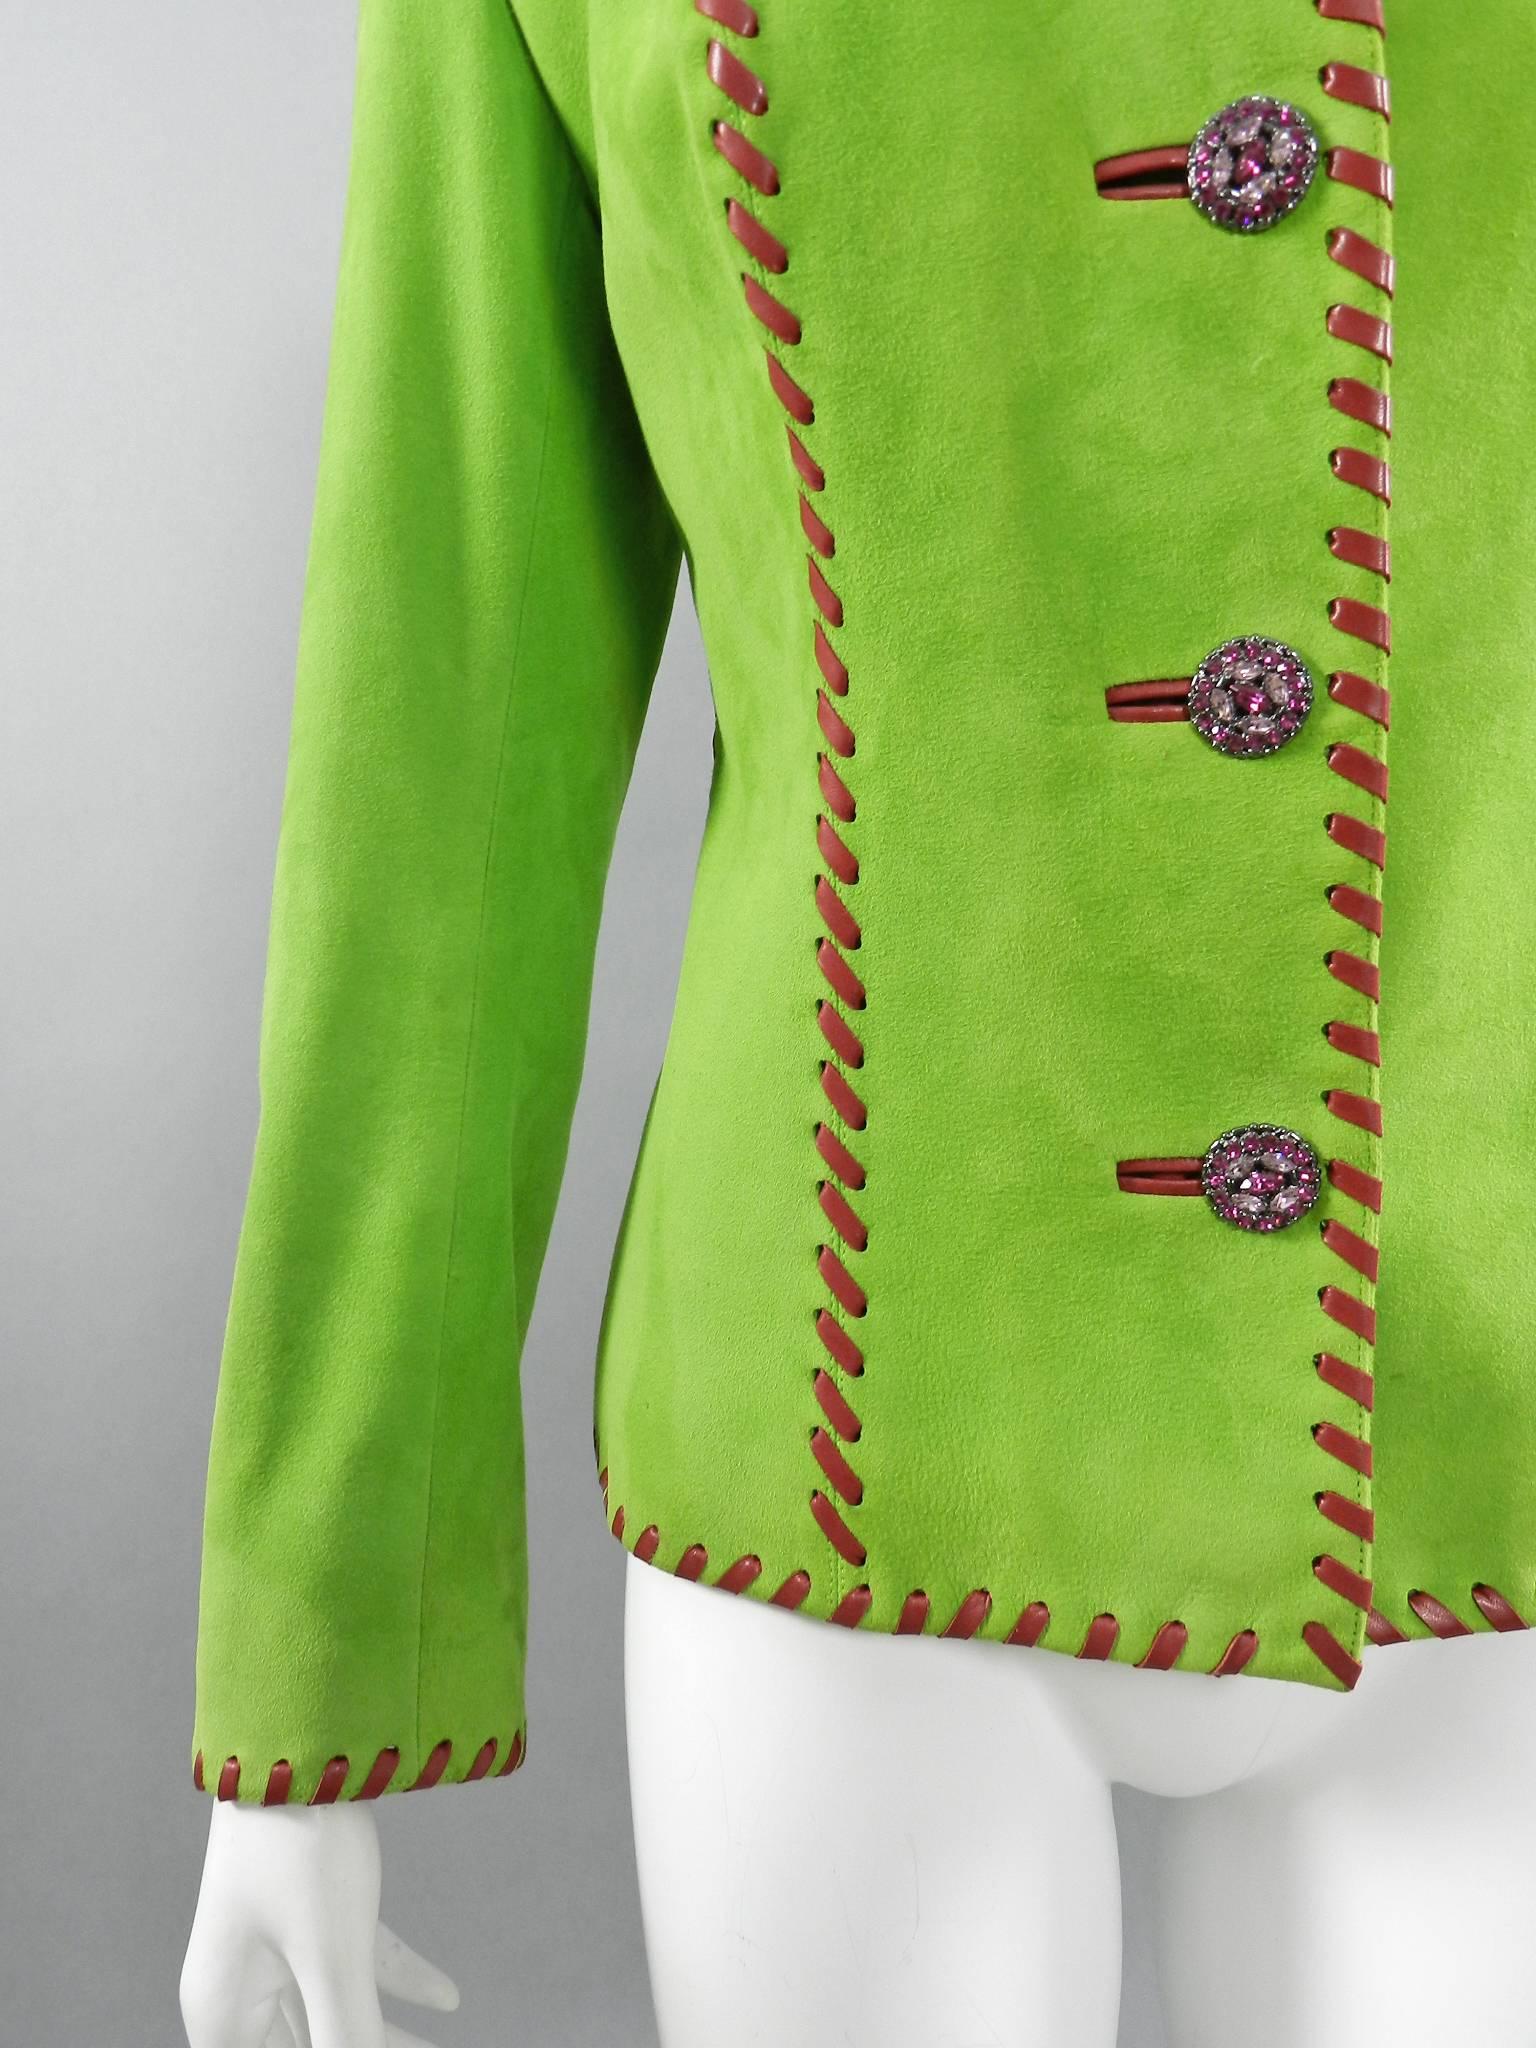 Yves Saint Laurent AW 1999 Haute Couture Lime Green and Fuchsia Suede Jacket For Sale 1